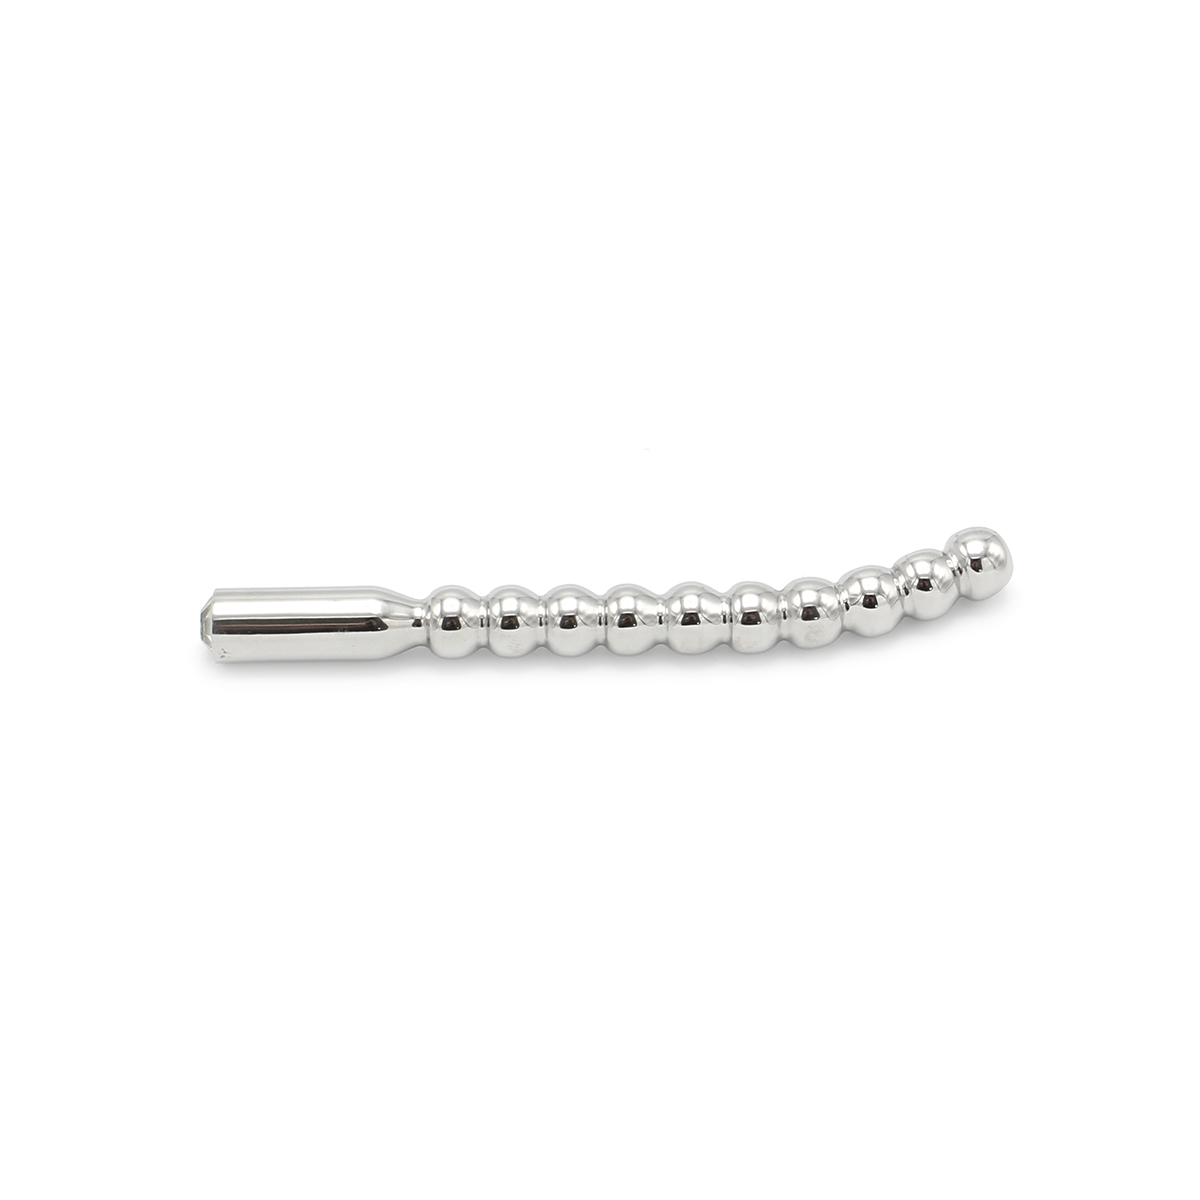 Solid-Penis-Plug-Beaded-Curved-10-mm-OPR-2960101-3